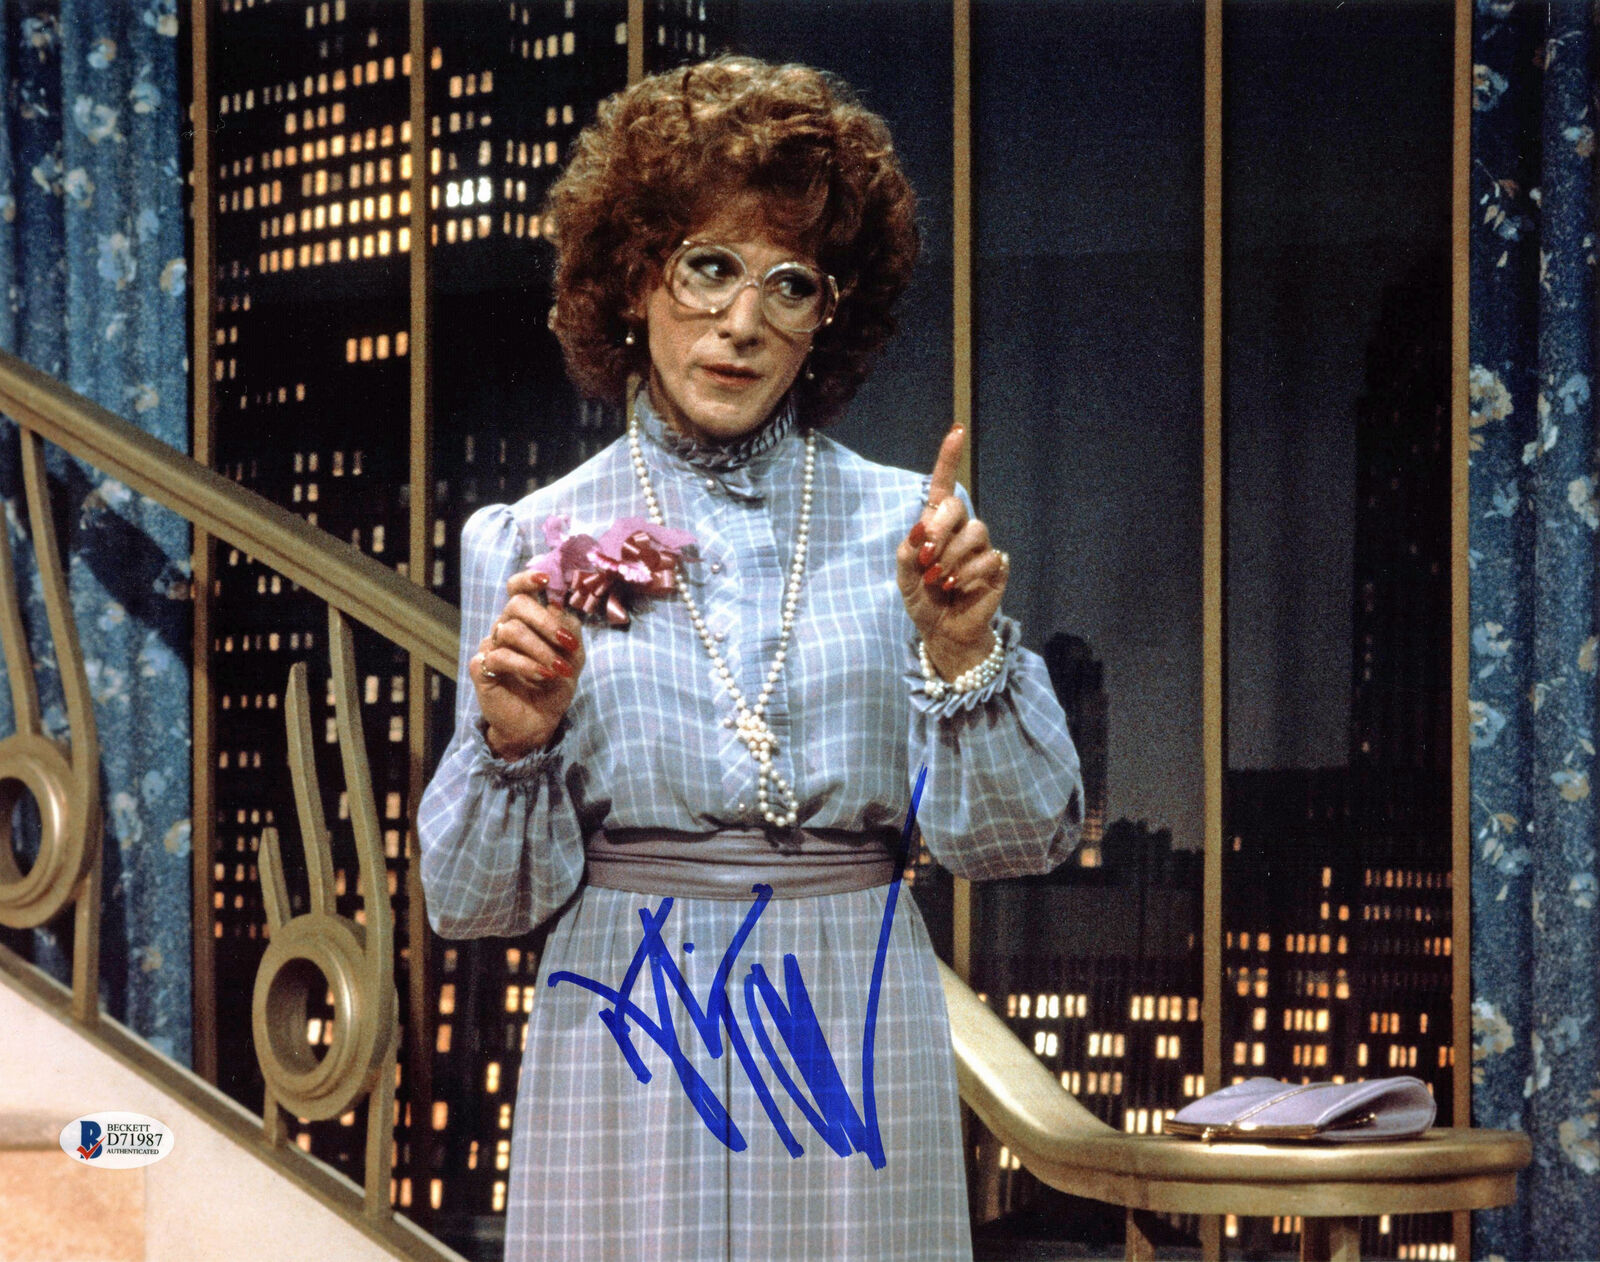 Dustin Hoffman Tootsie Authentic Signed 11x14 Photo Poster painting Autographed BAS #D71987